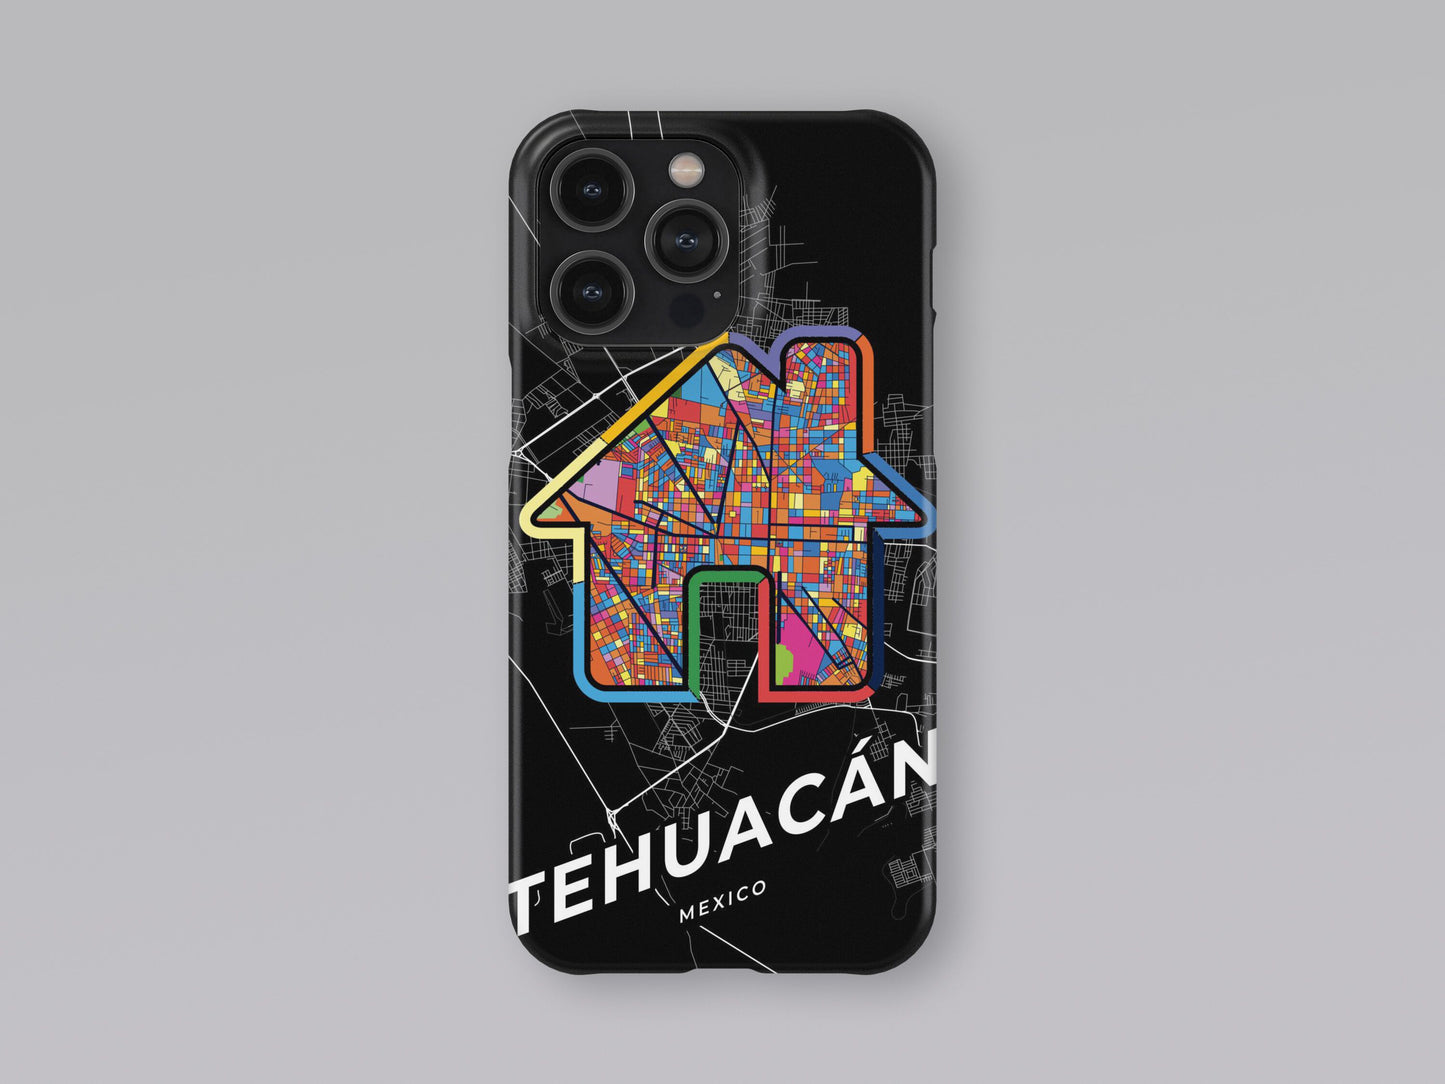 Tehuacán Mexico slim phone case with colorful icon 3